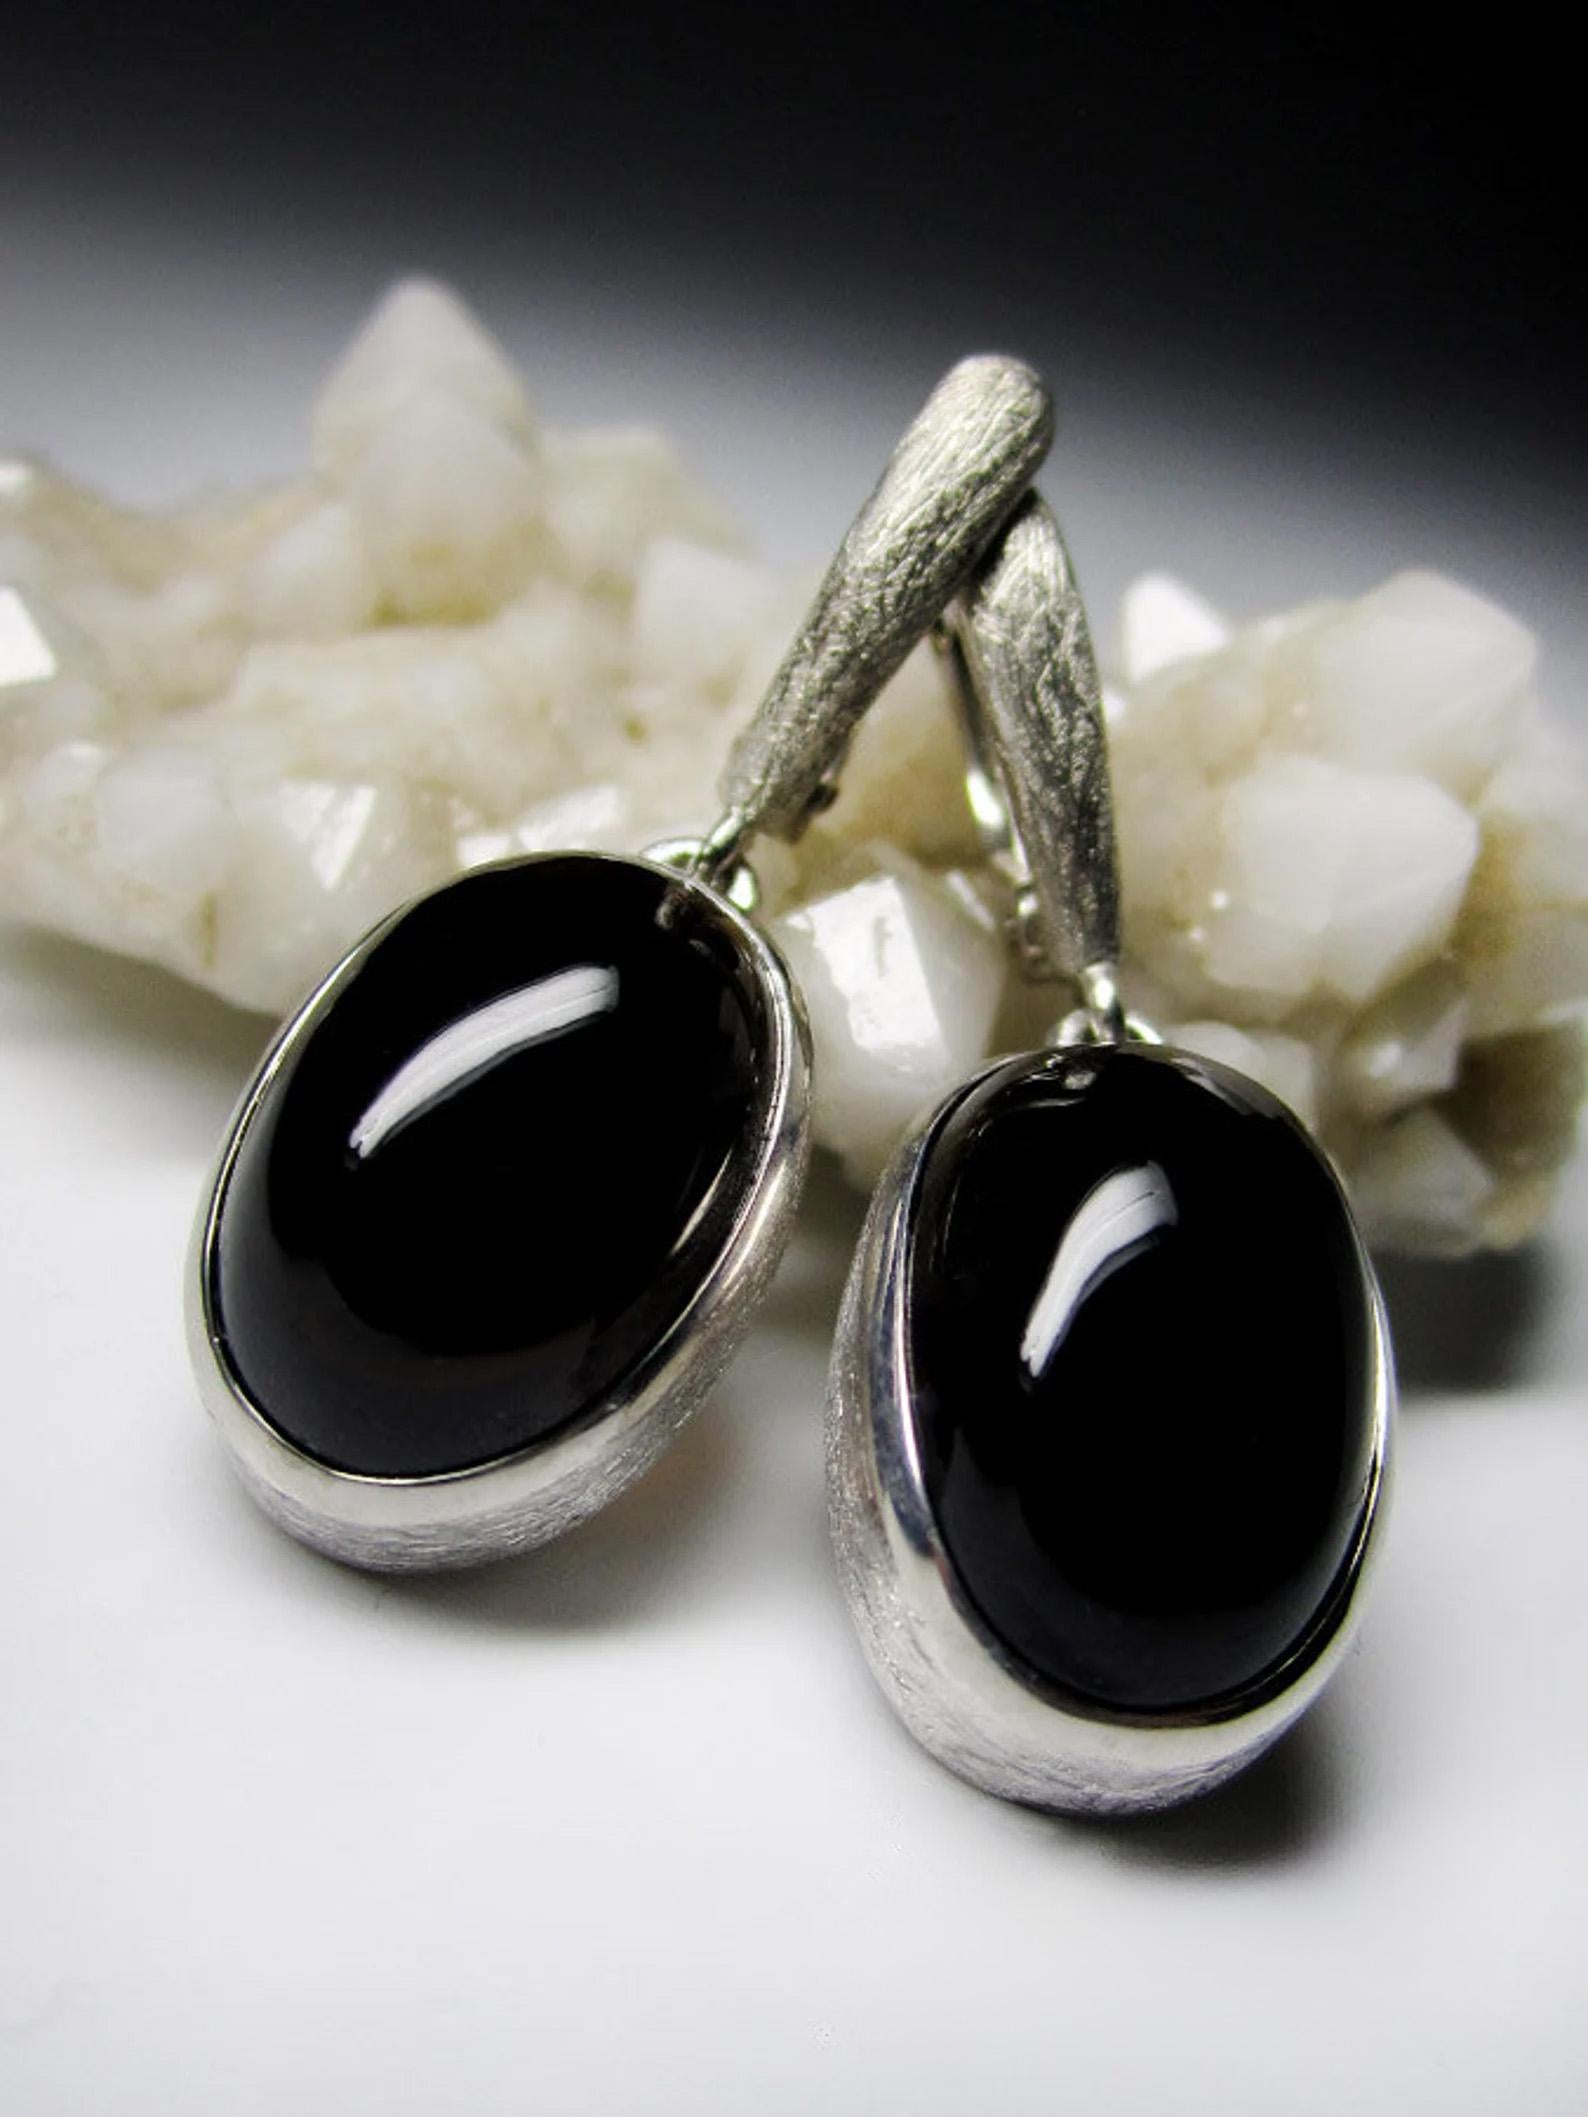 Morion Quartz Scratched Silver Earrings Cabochon Oval Onyx Black Color Gemstone  In New Condition For Sale In Berlin, DE